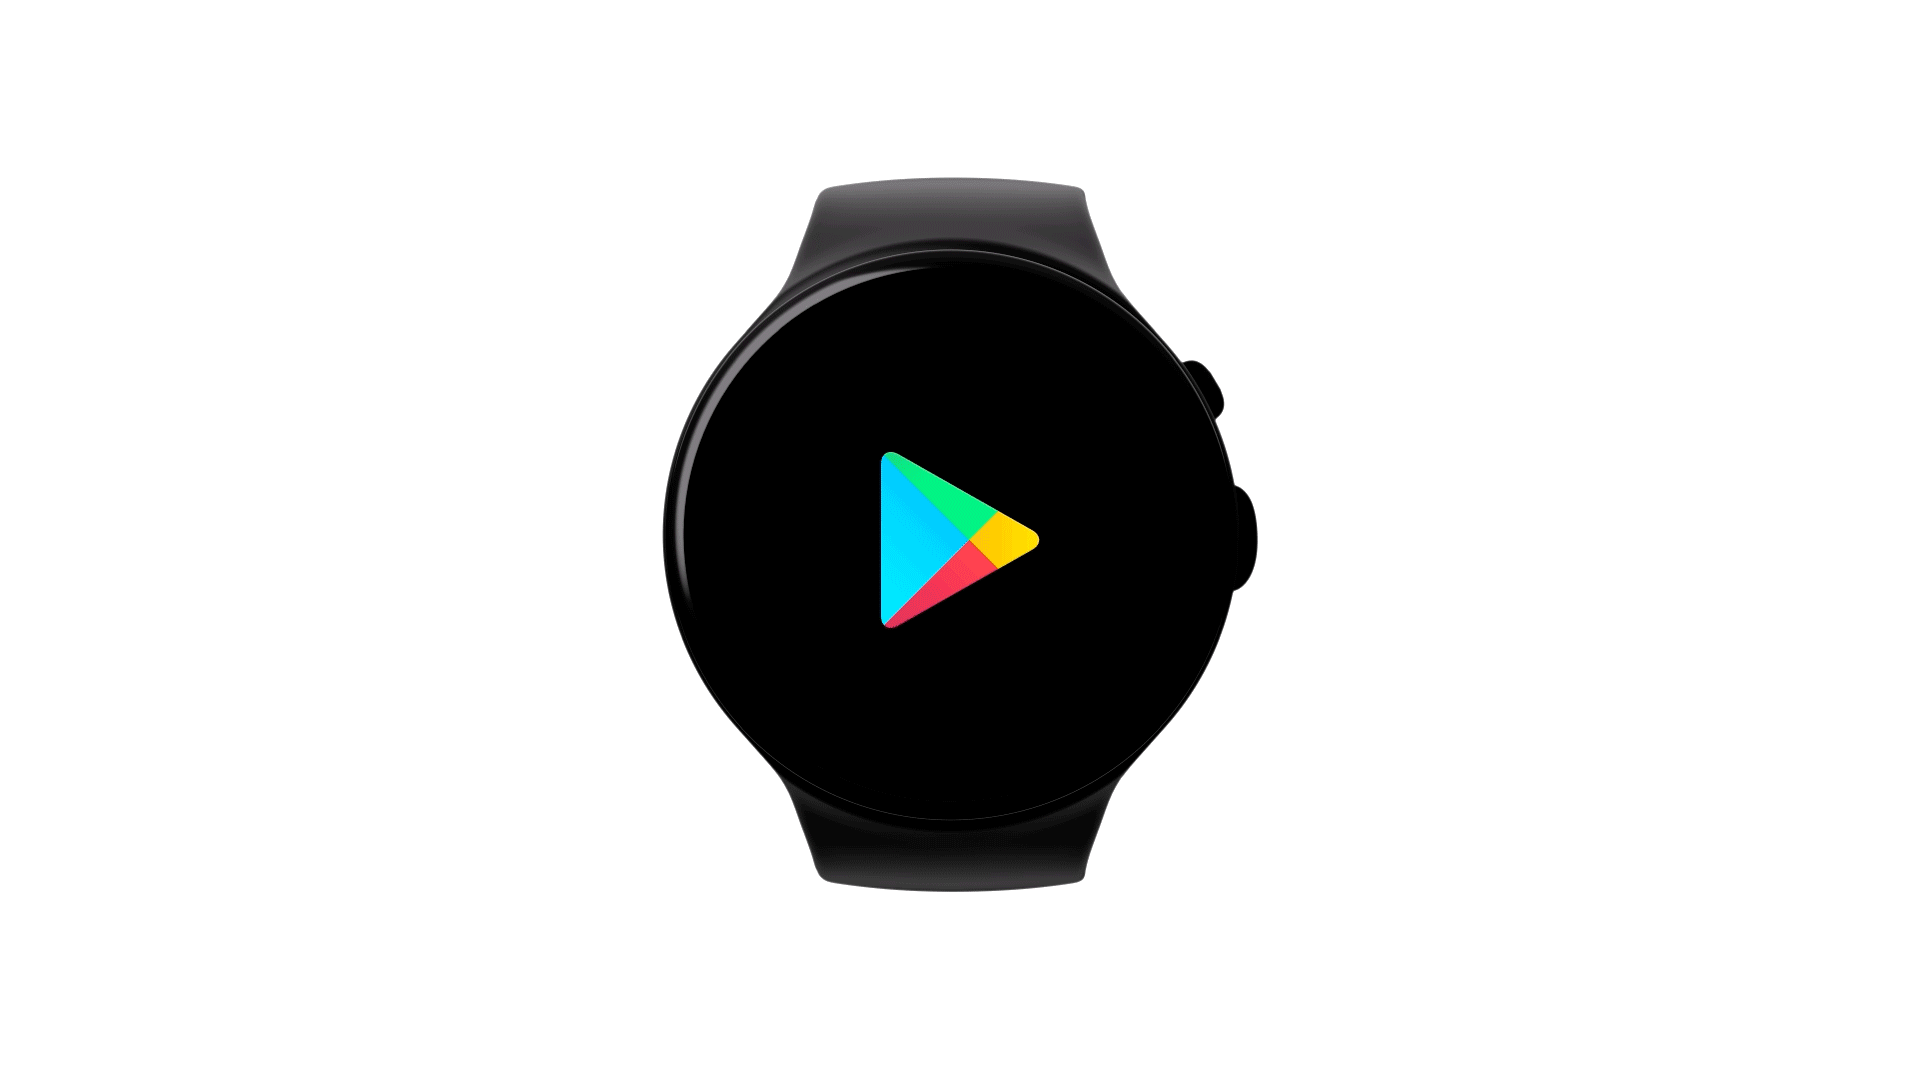 Various app logos including Spotify, adidas Running, LINE, and more are spread out in a circle outside of a watch.